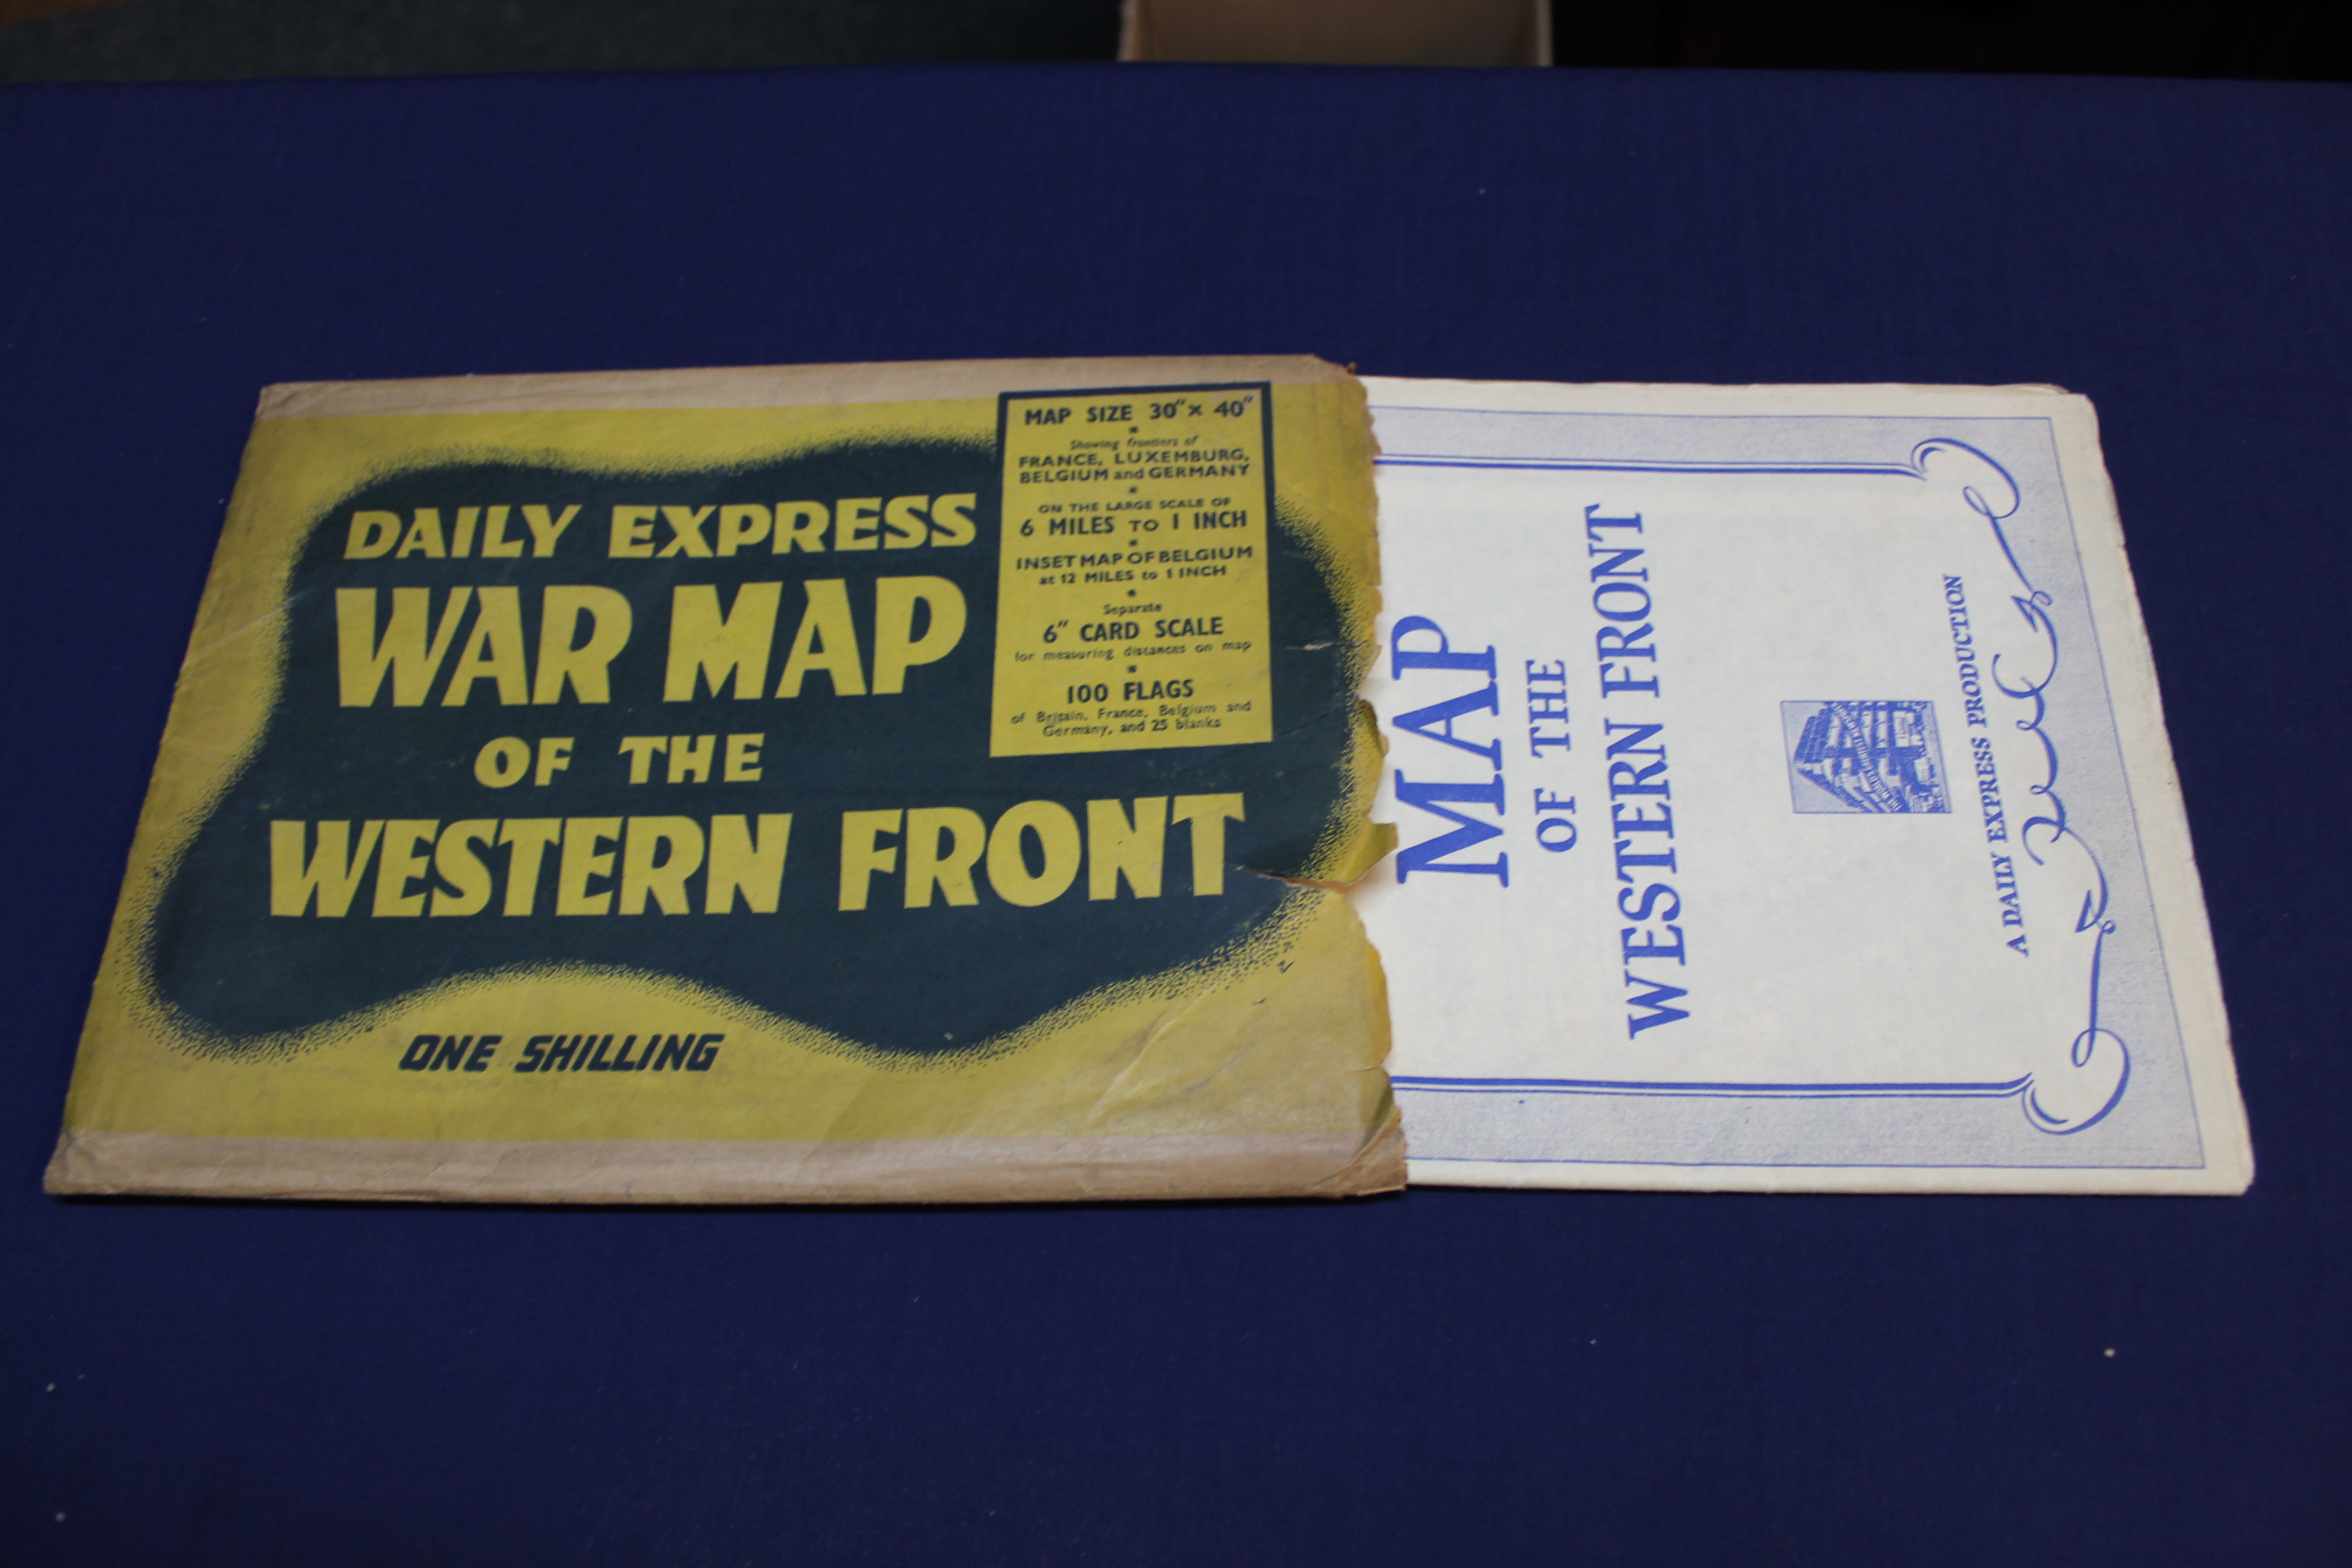 A Daily Express 'War Map of the Western Front',